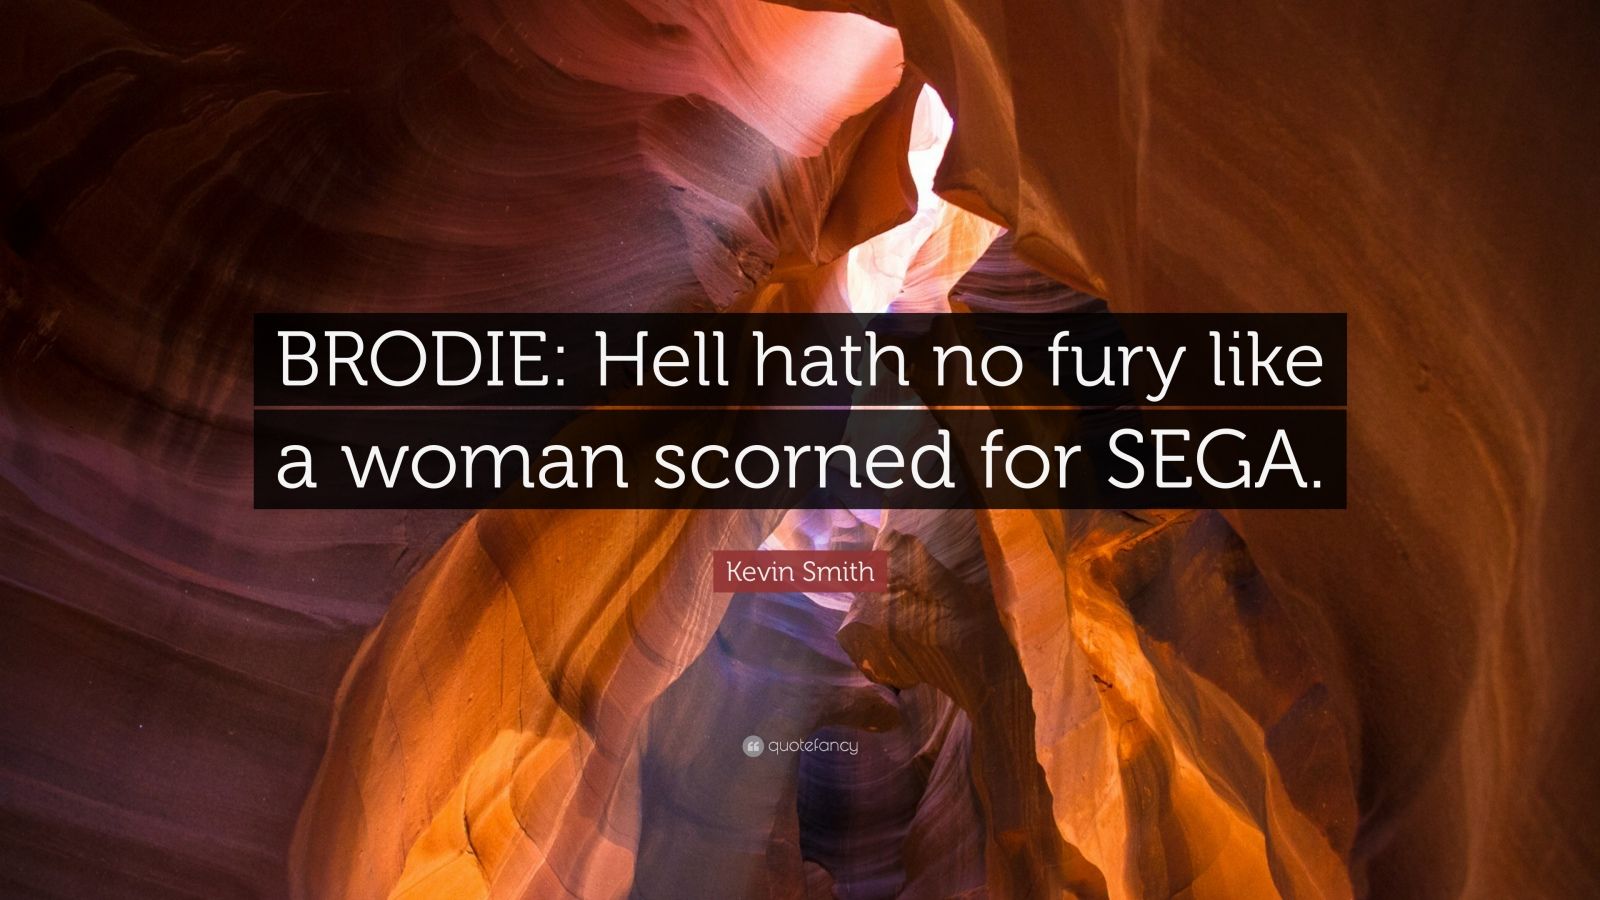 Kevin Smith Quote “brodie Hell Hath No Fury Like A Woman Scorned For Sega”